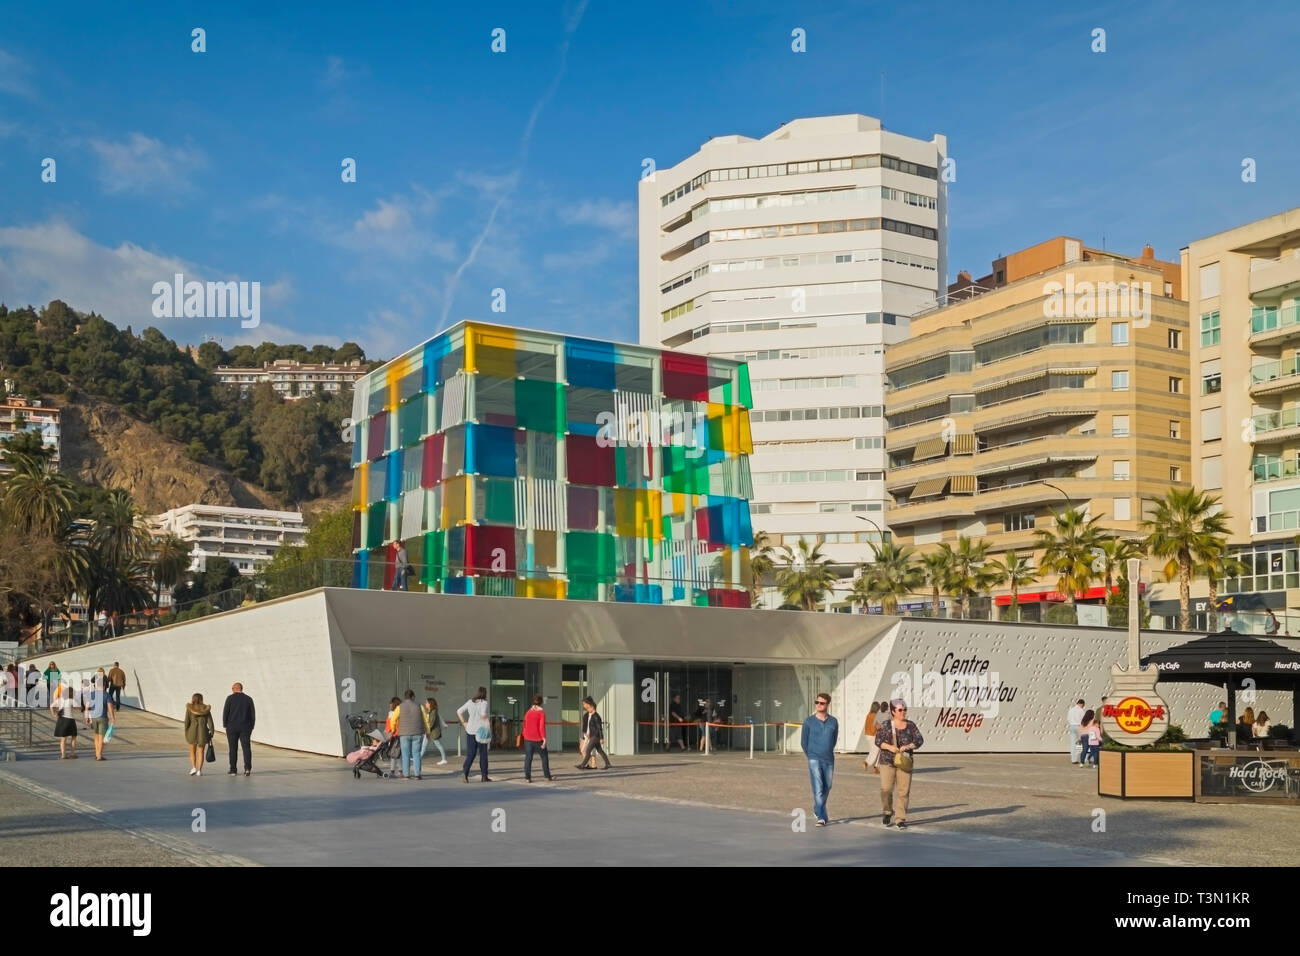 The distinctive glass cube of the Pompidou Centre museum on Muelle Uno, Malaga.  The structure was designed by French artist Daniel Buren (1938 - ).   Stock Photo